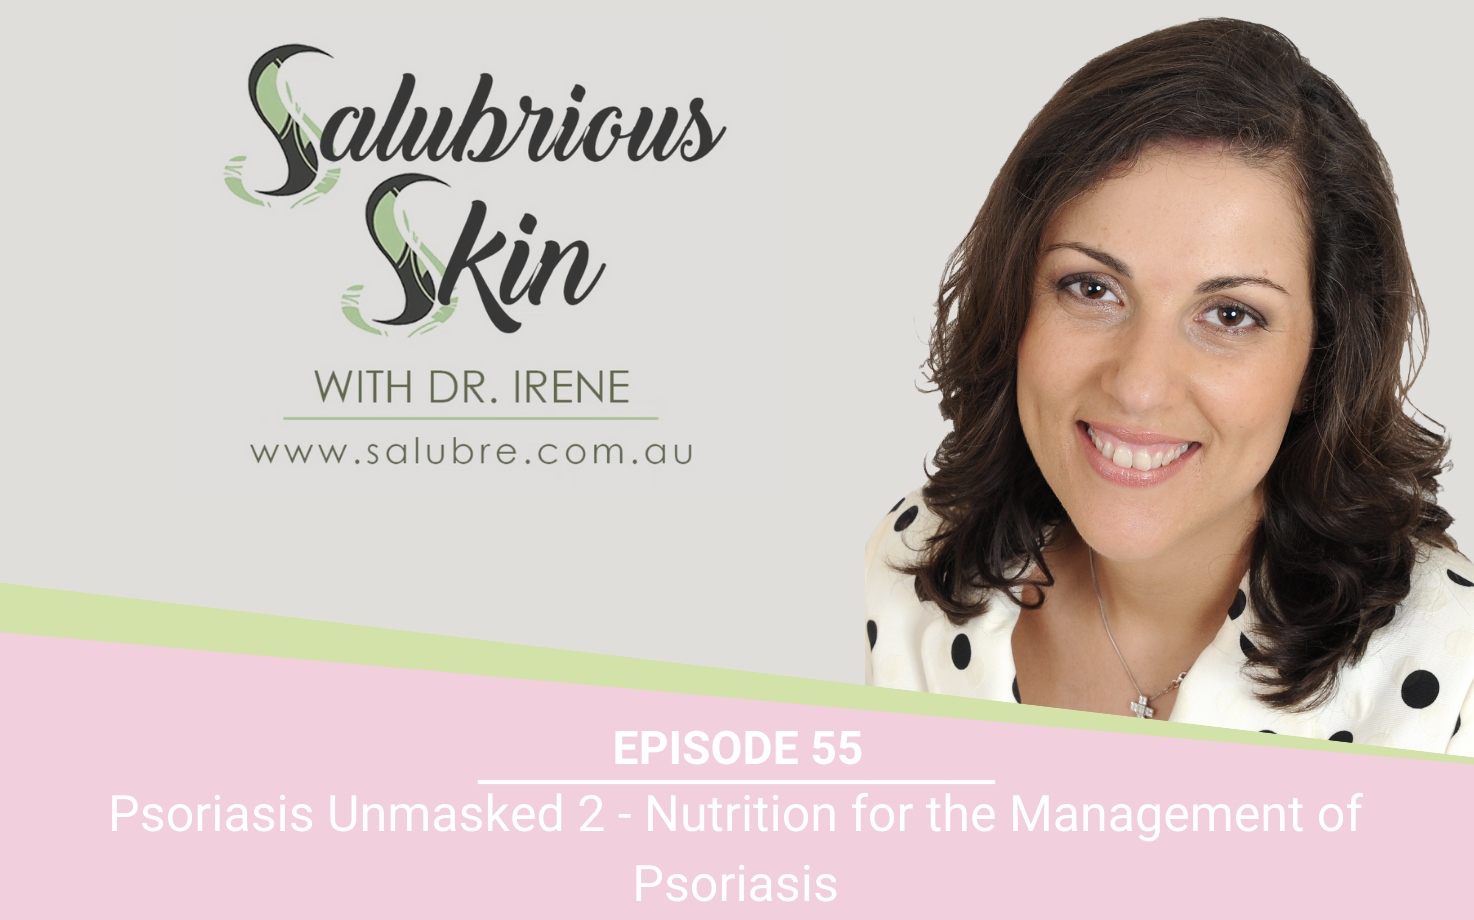 Podcast 55: Psoriasis Unmasked 2 - Nutrition for the Management of Psoriasis